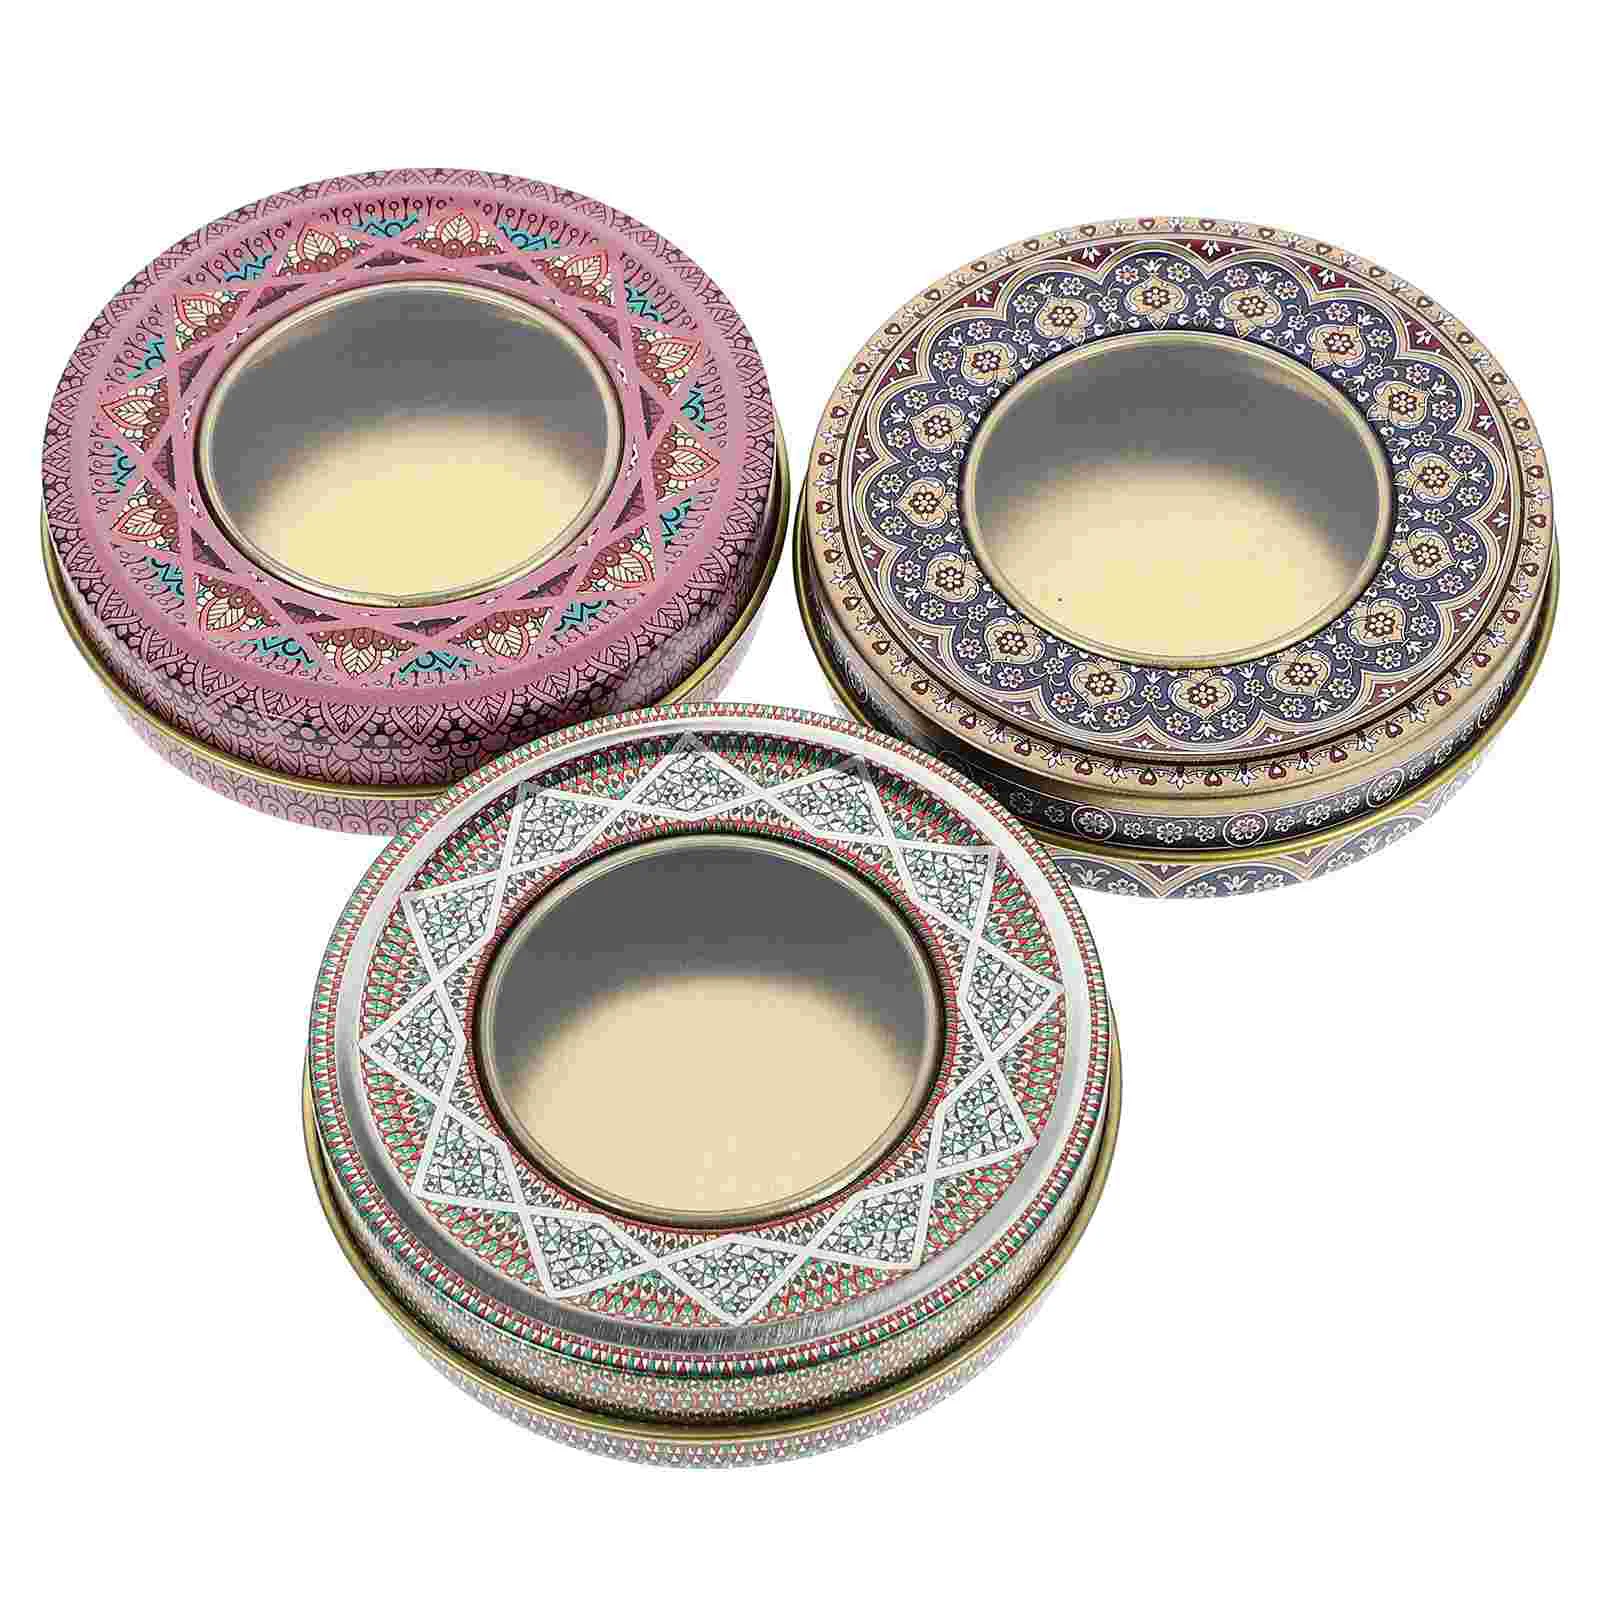 

4 Pcs Saffron Tin Box Cans Durable Canisters Compact Bulk Wedding Decor Sturdy Small Containers Portable Jars Storage